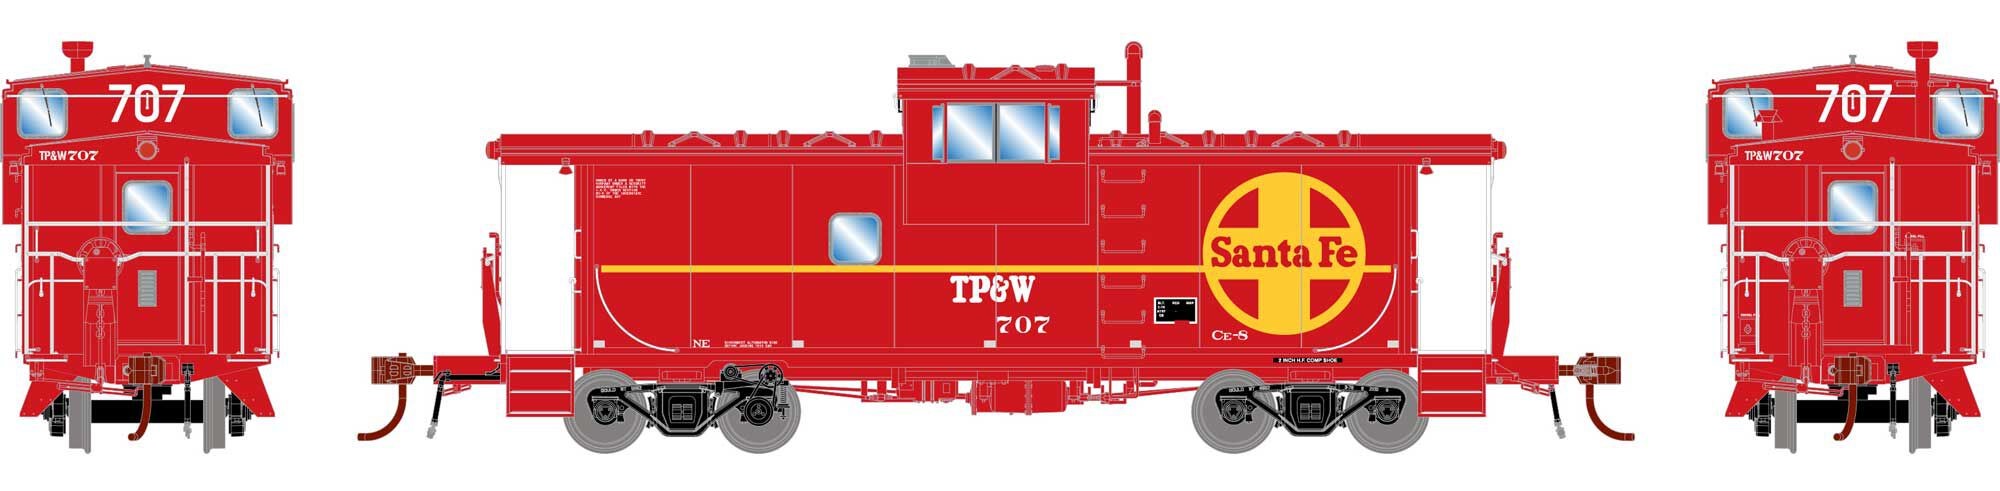 Athearn Genesis HO ATHG78581 DCC/NCE Equipped ICC Caboose With Lights Santa Fe Class CE-8 TP&W #707